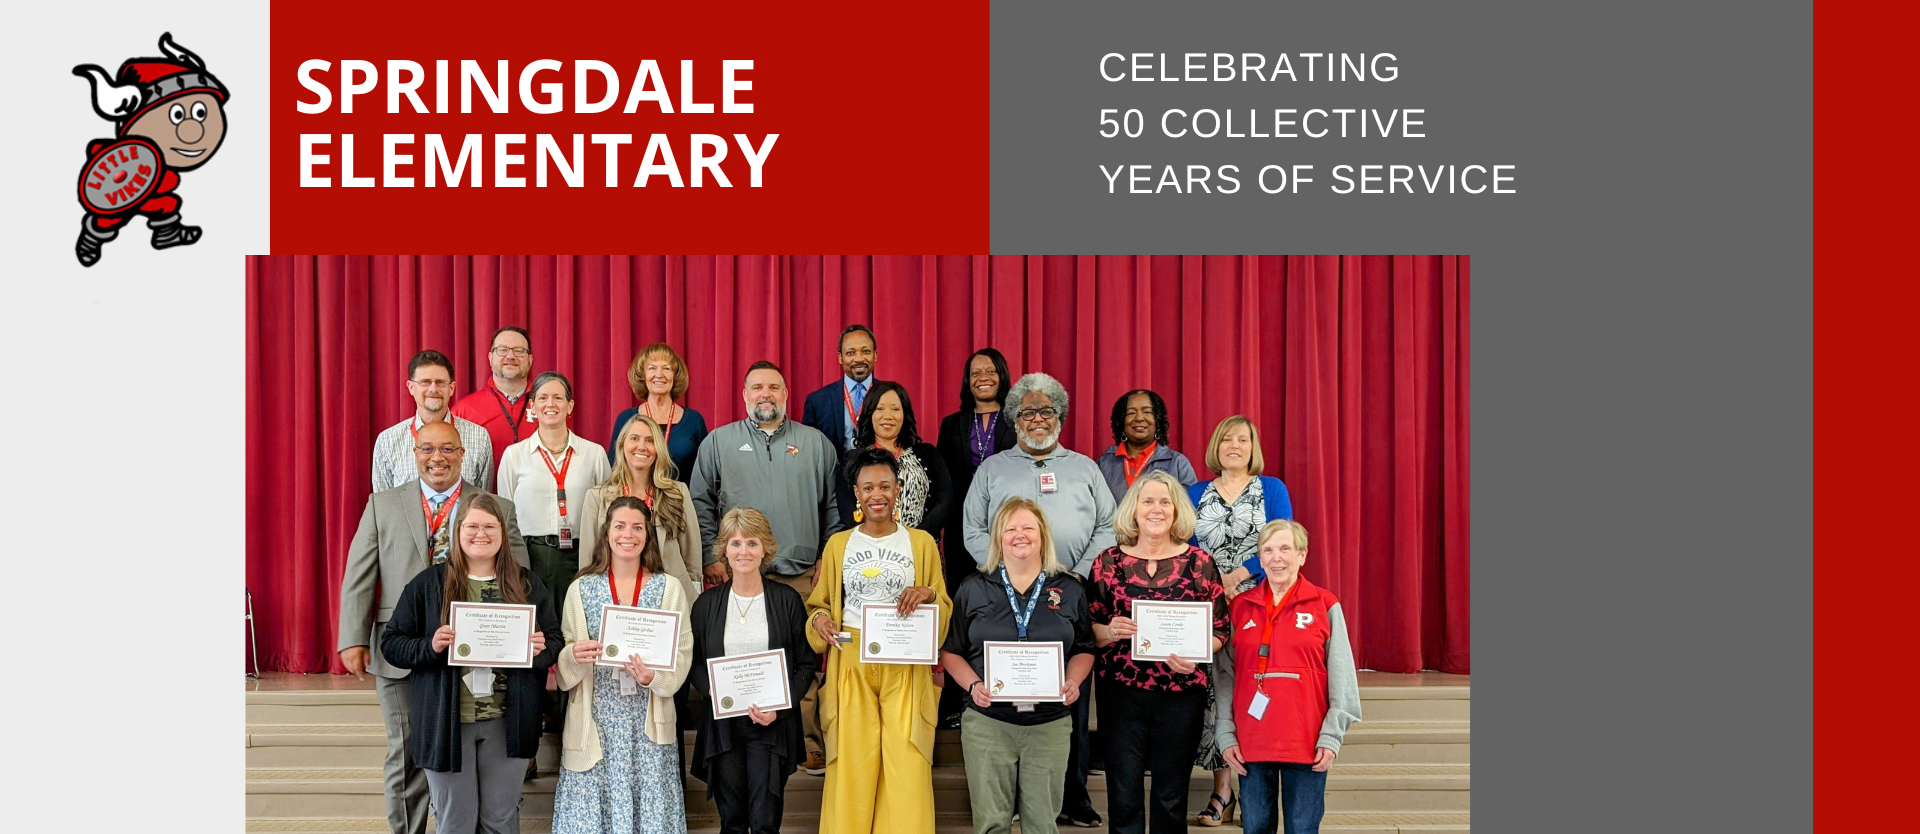 Years of Service award slide photo with administrators and staff with awards